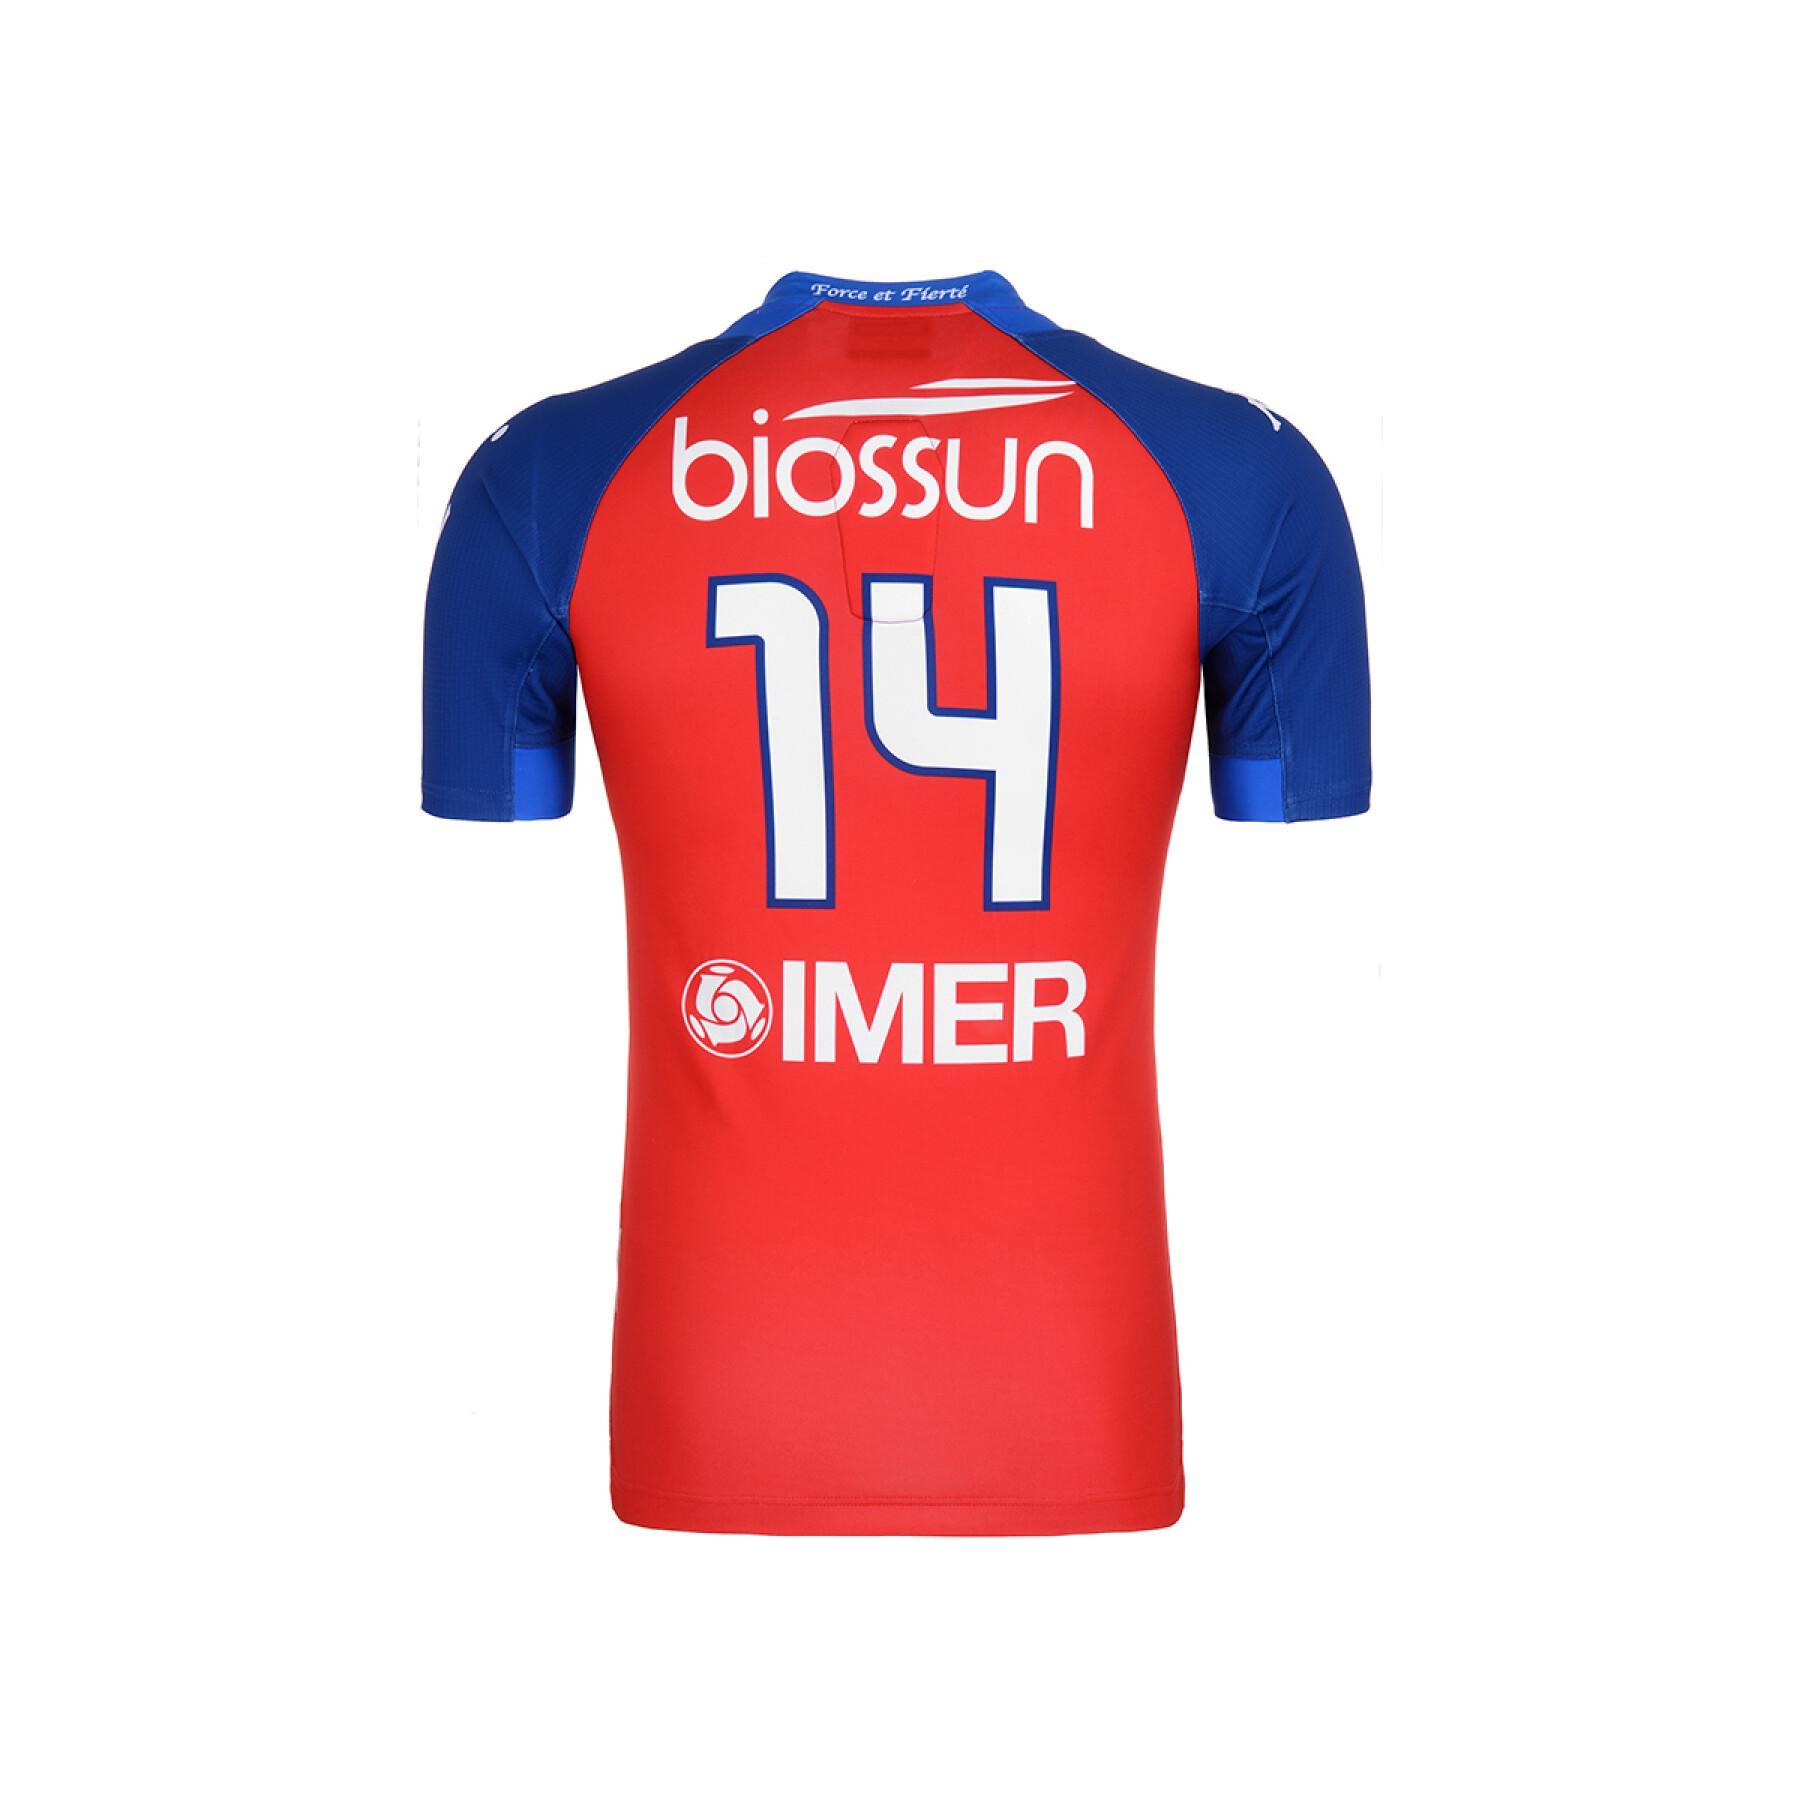 Maillot extérieur FC Grenoble Rugby 2019/20